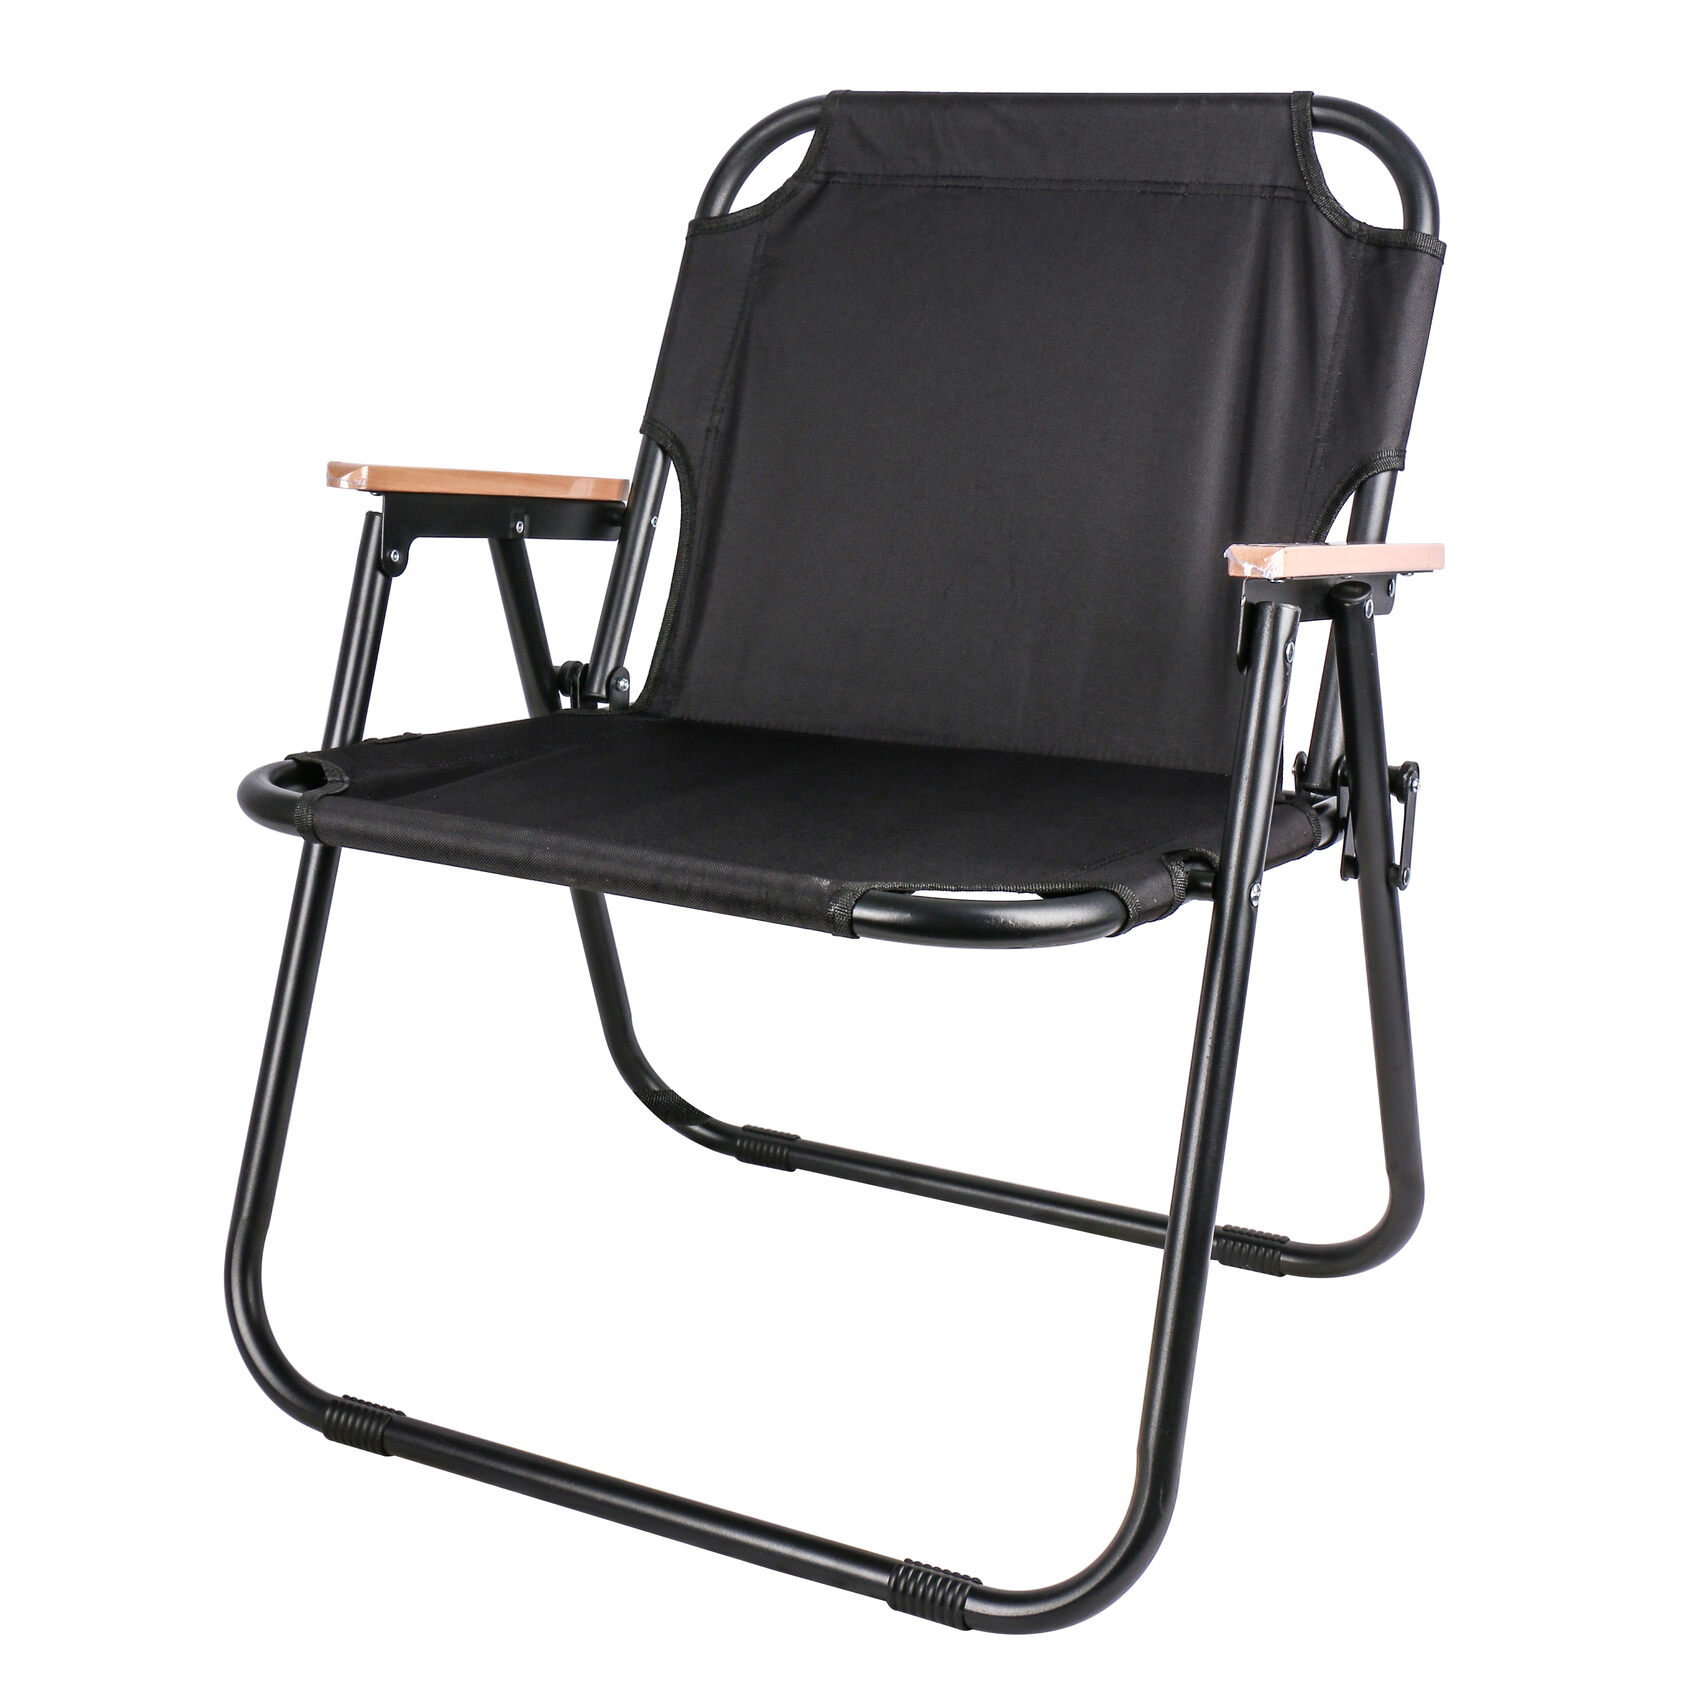 CAMPMATE FOLDABLE CAMPING CHAIR CM-7877 WITH WOODEN ARM REST |FOR CAMPING - FISHING -OUTDOOR- PICNIC